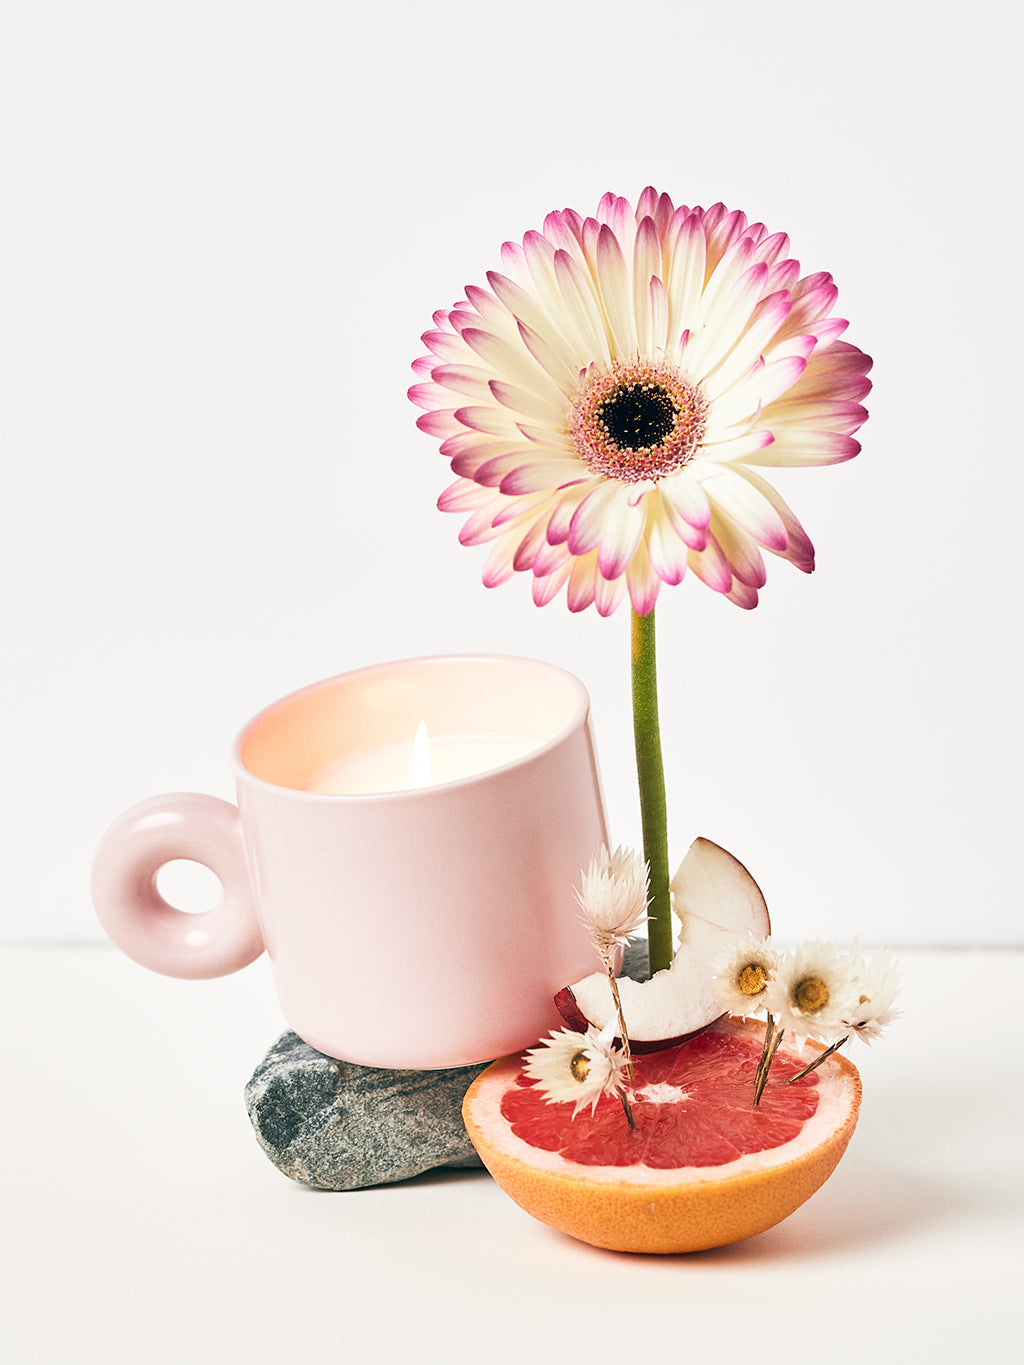 Pink Candle Cup - Apple & Grapefruit